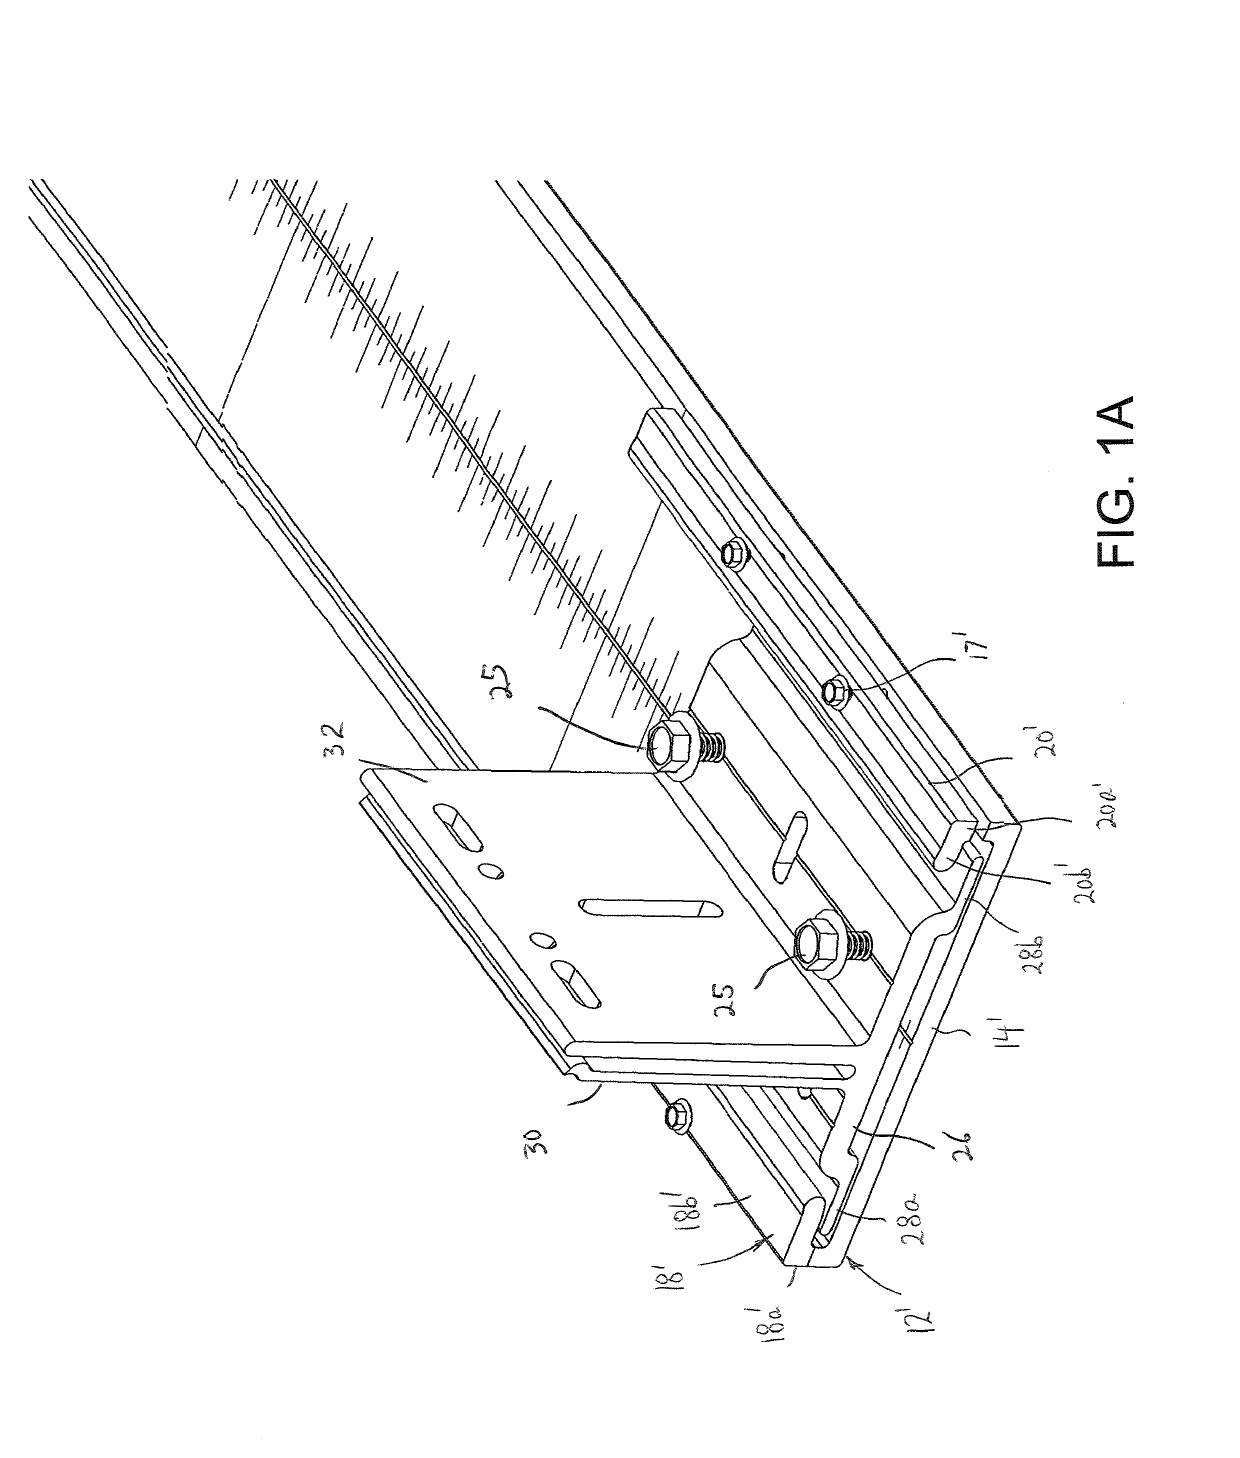 System for mounting wall panels to a wall